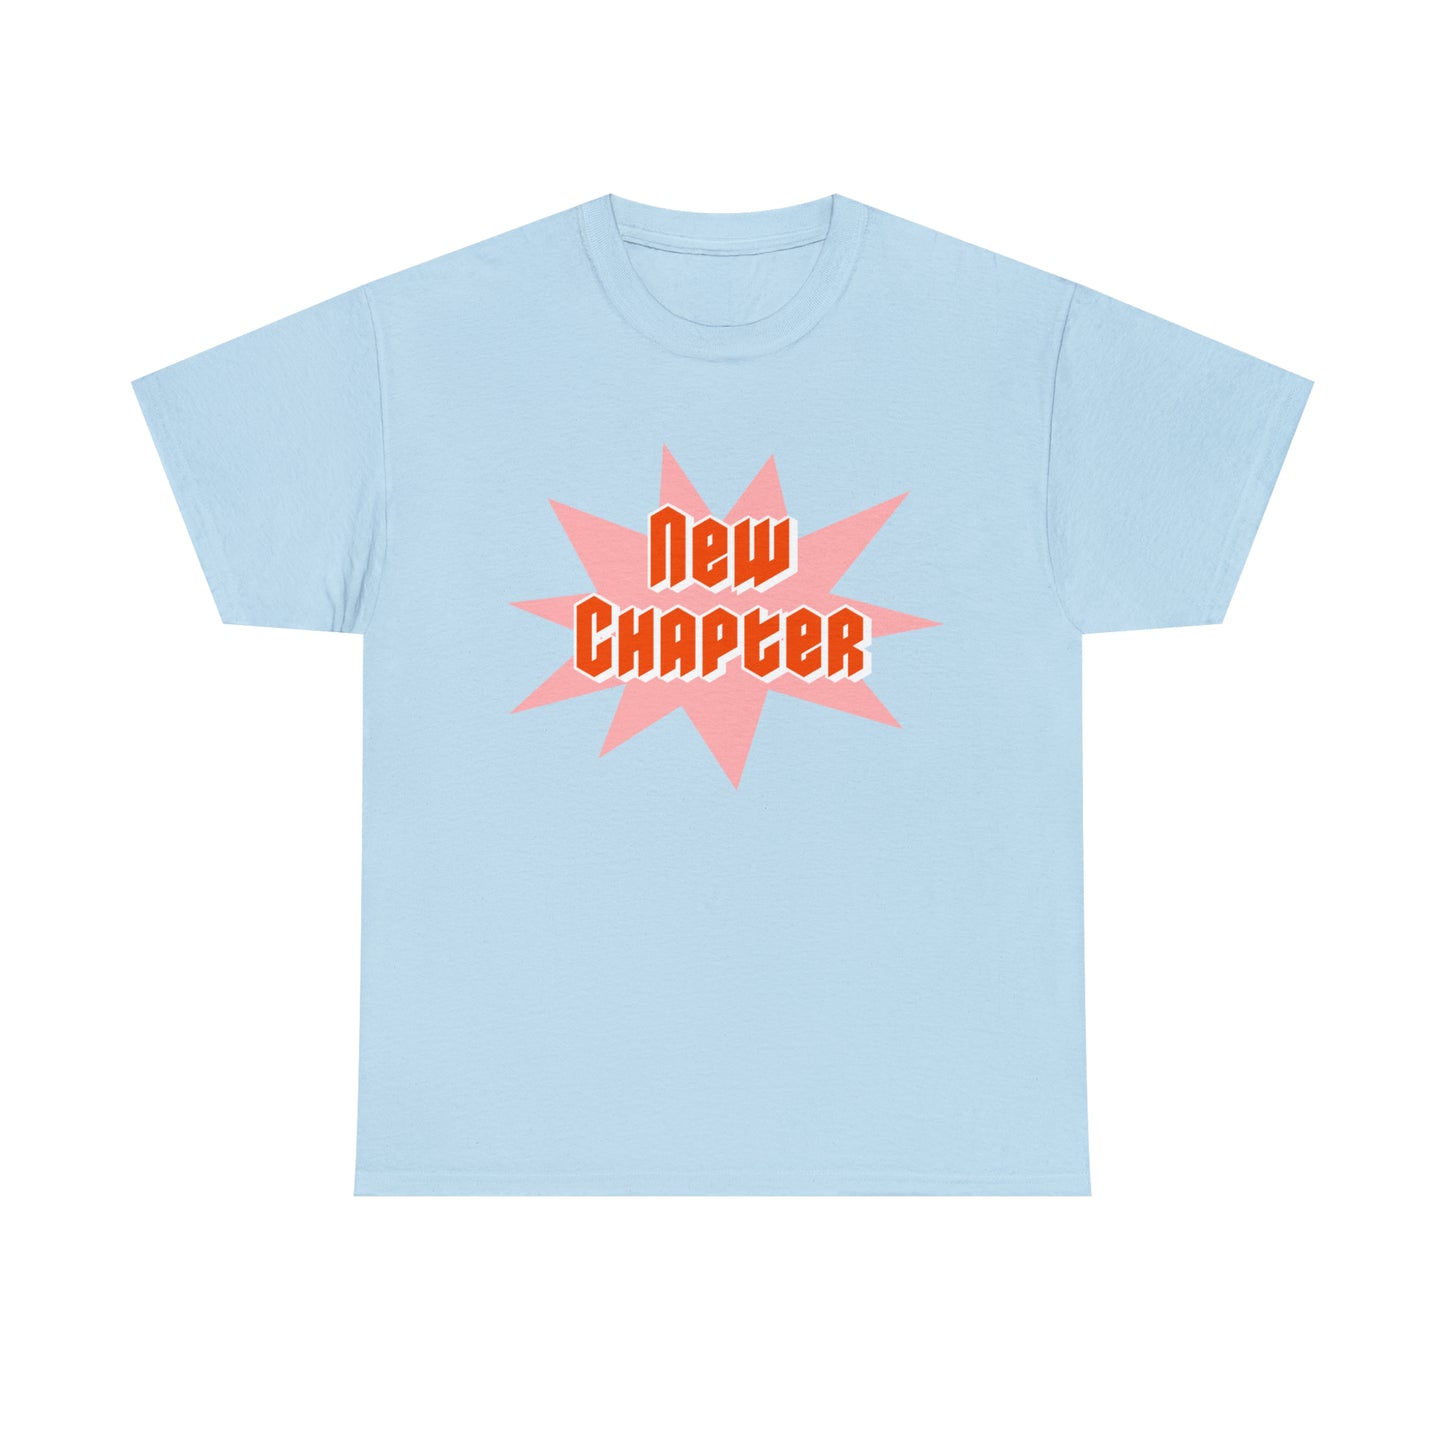 New Chapter - Cotton Tee